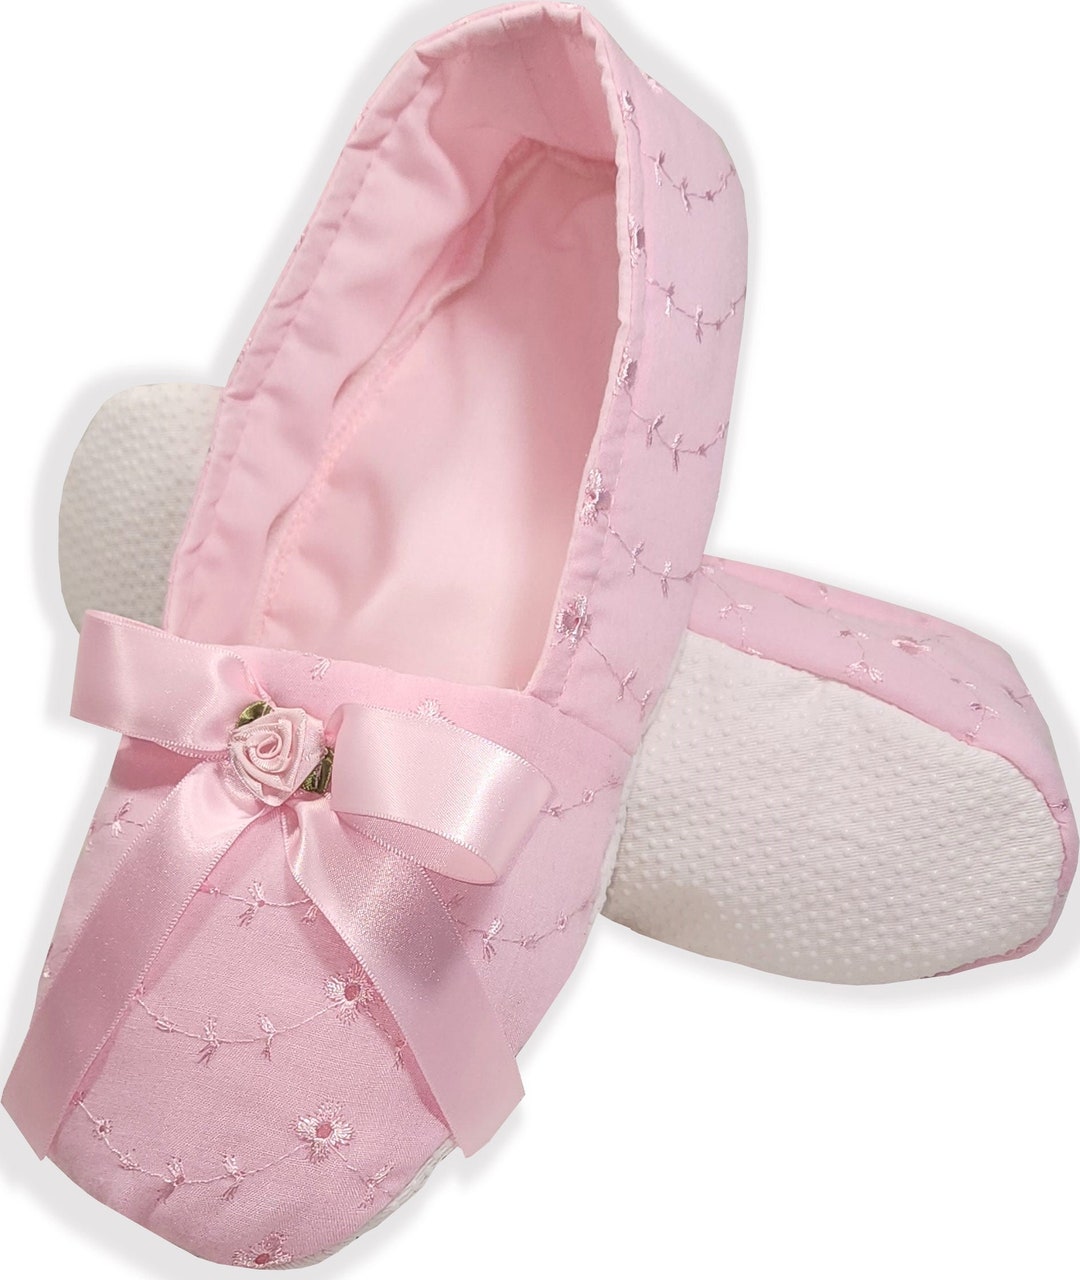 Made to Fit You Pink Eyelet Adult Baby Sissy Slippers for - Etsy